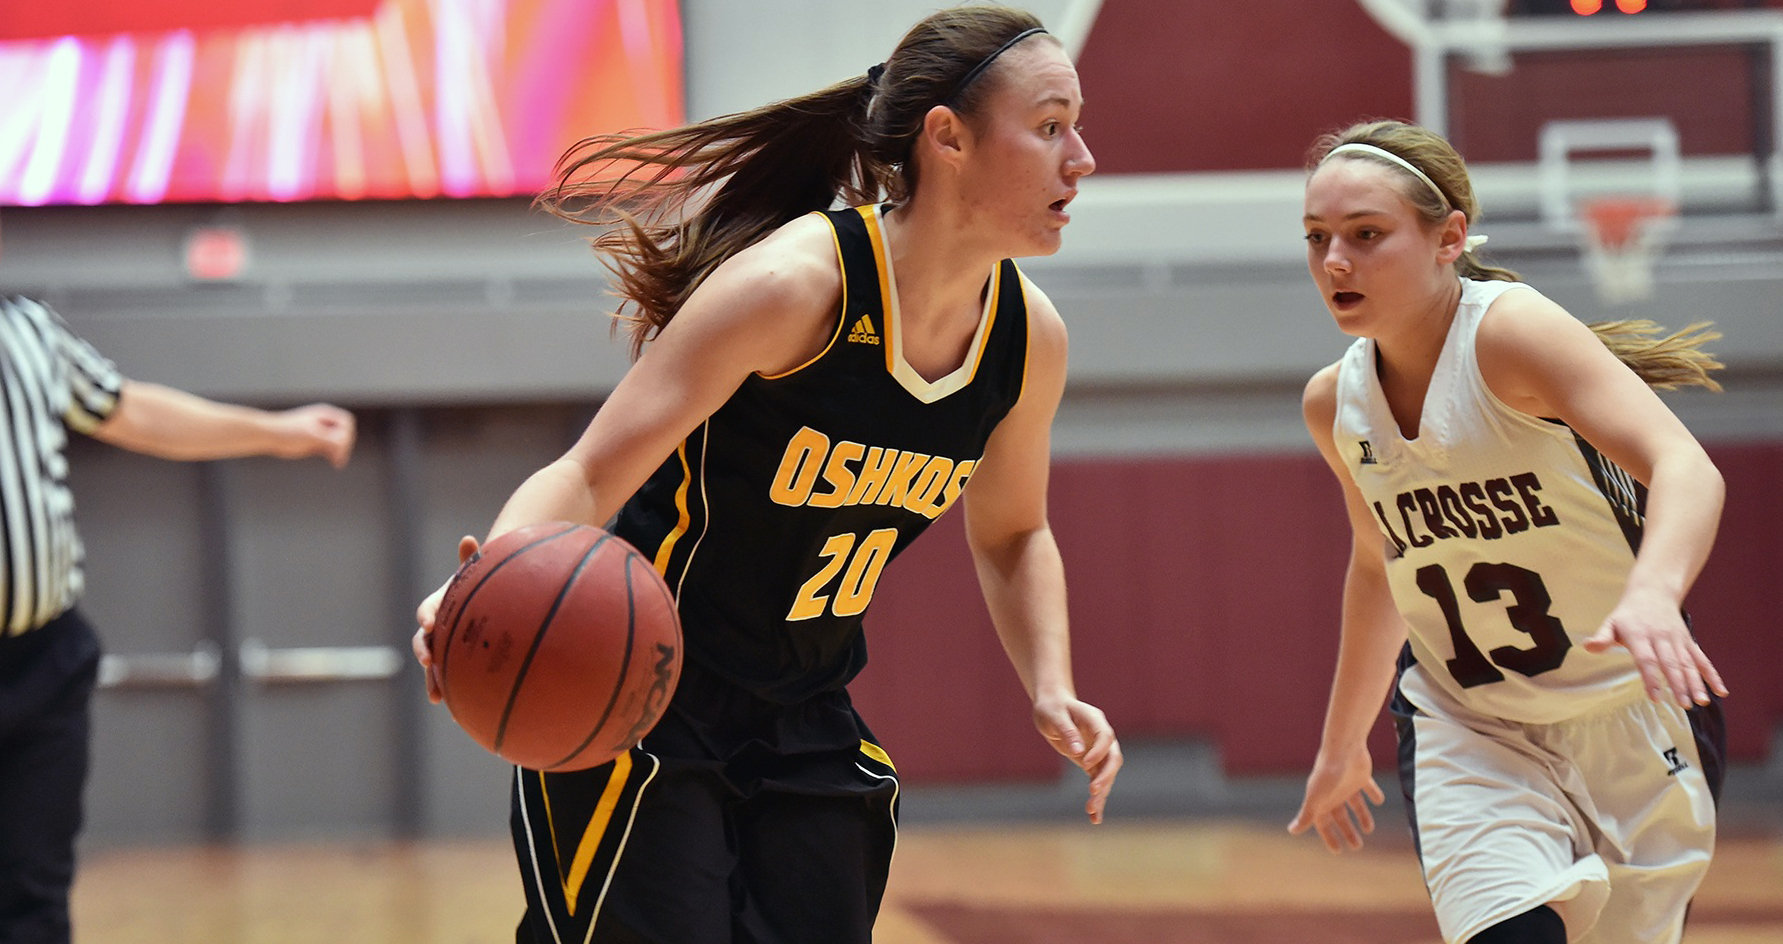 Ashley Neustifter scored two points and grabbed two rebounds as UW-Oshkosh limited UW-La Crosse to just 38 points.